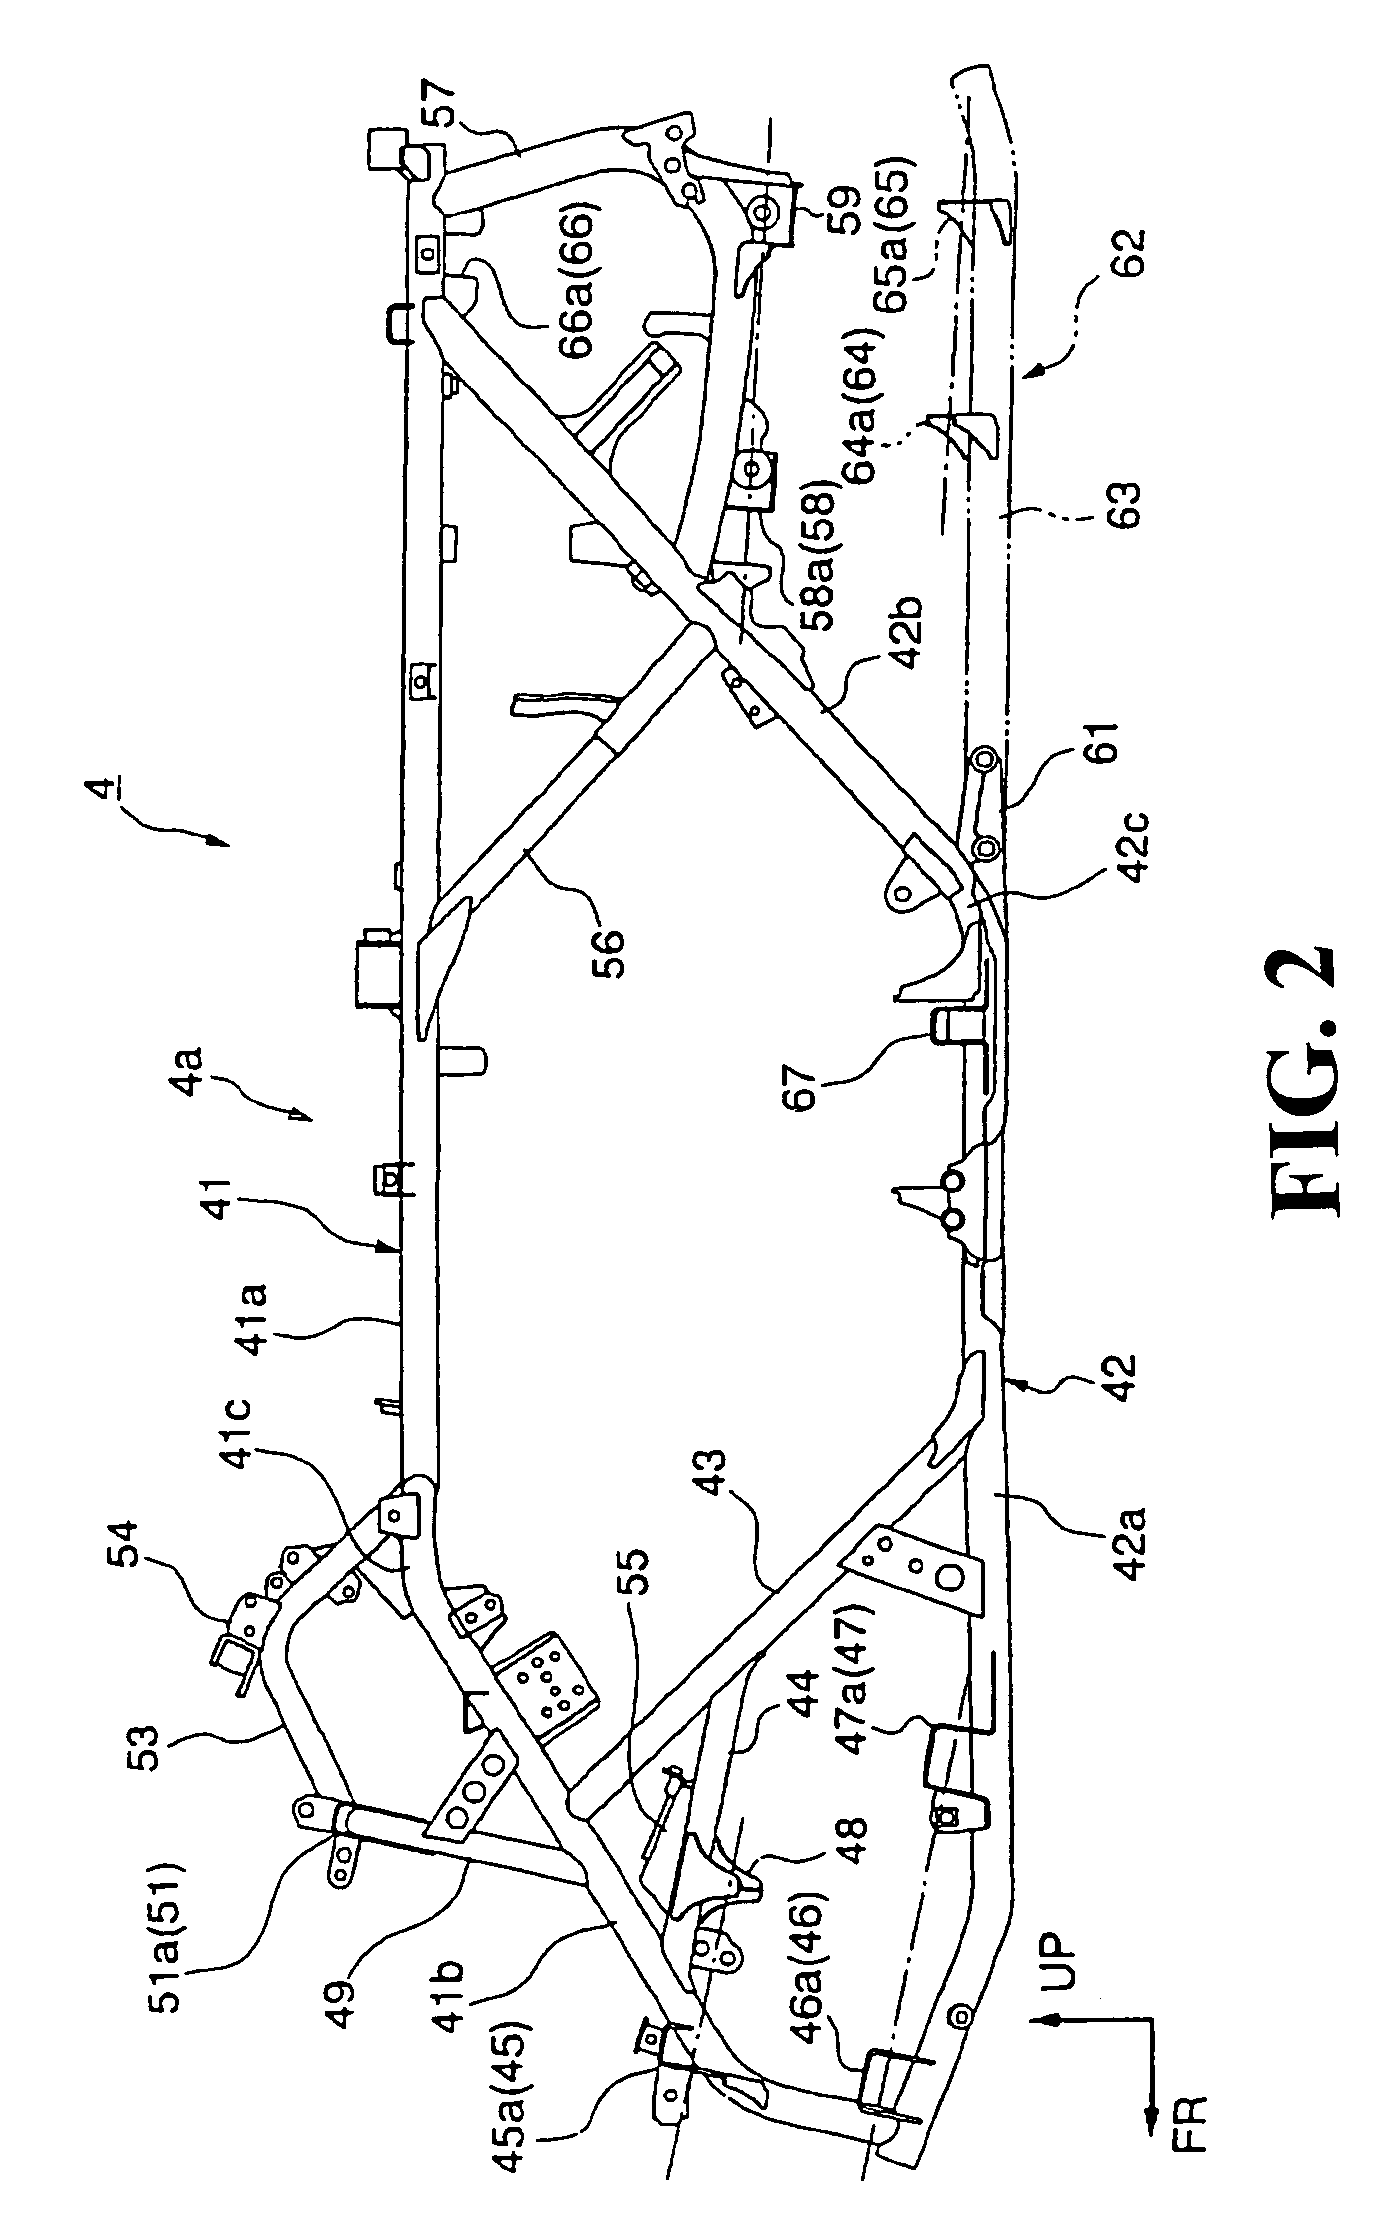 Power steering system for all-terrain buggy vehicle